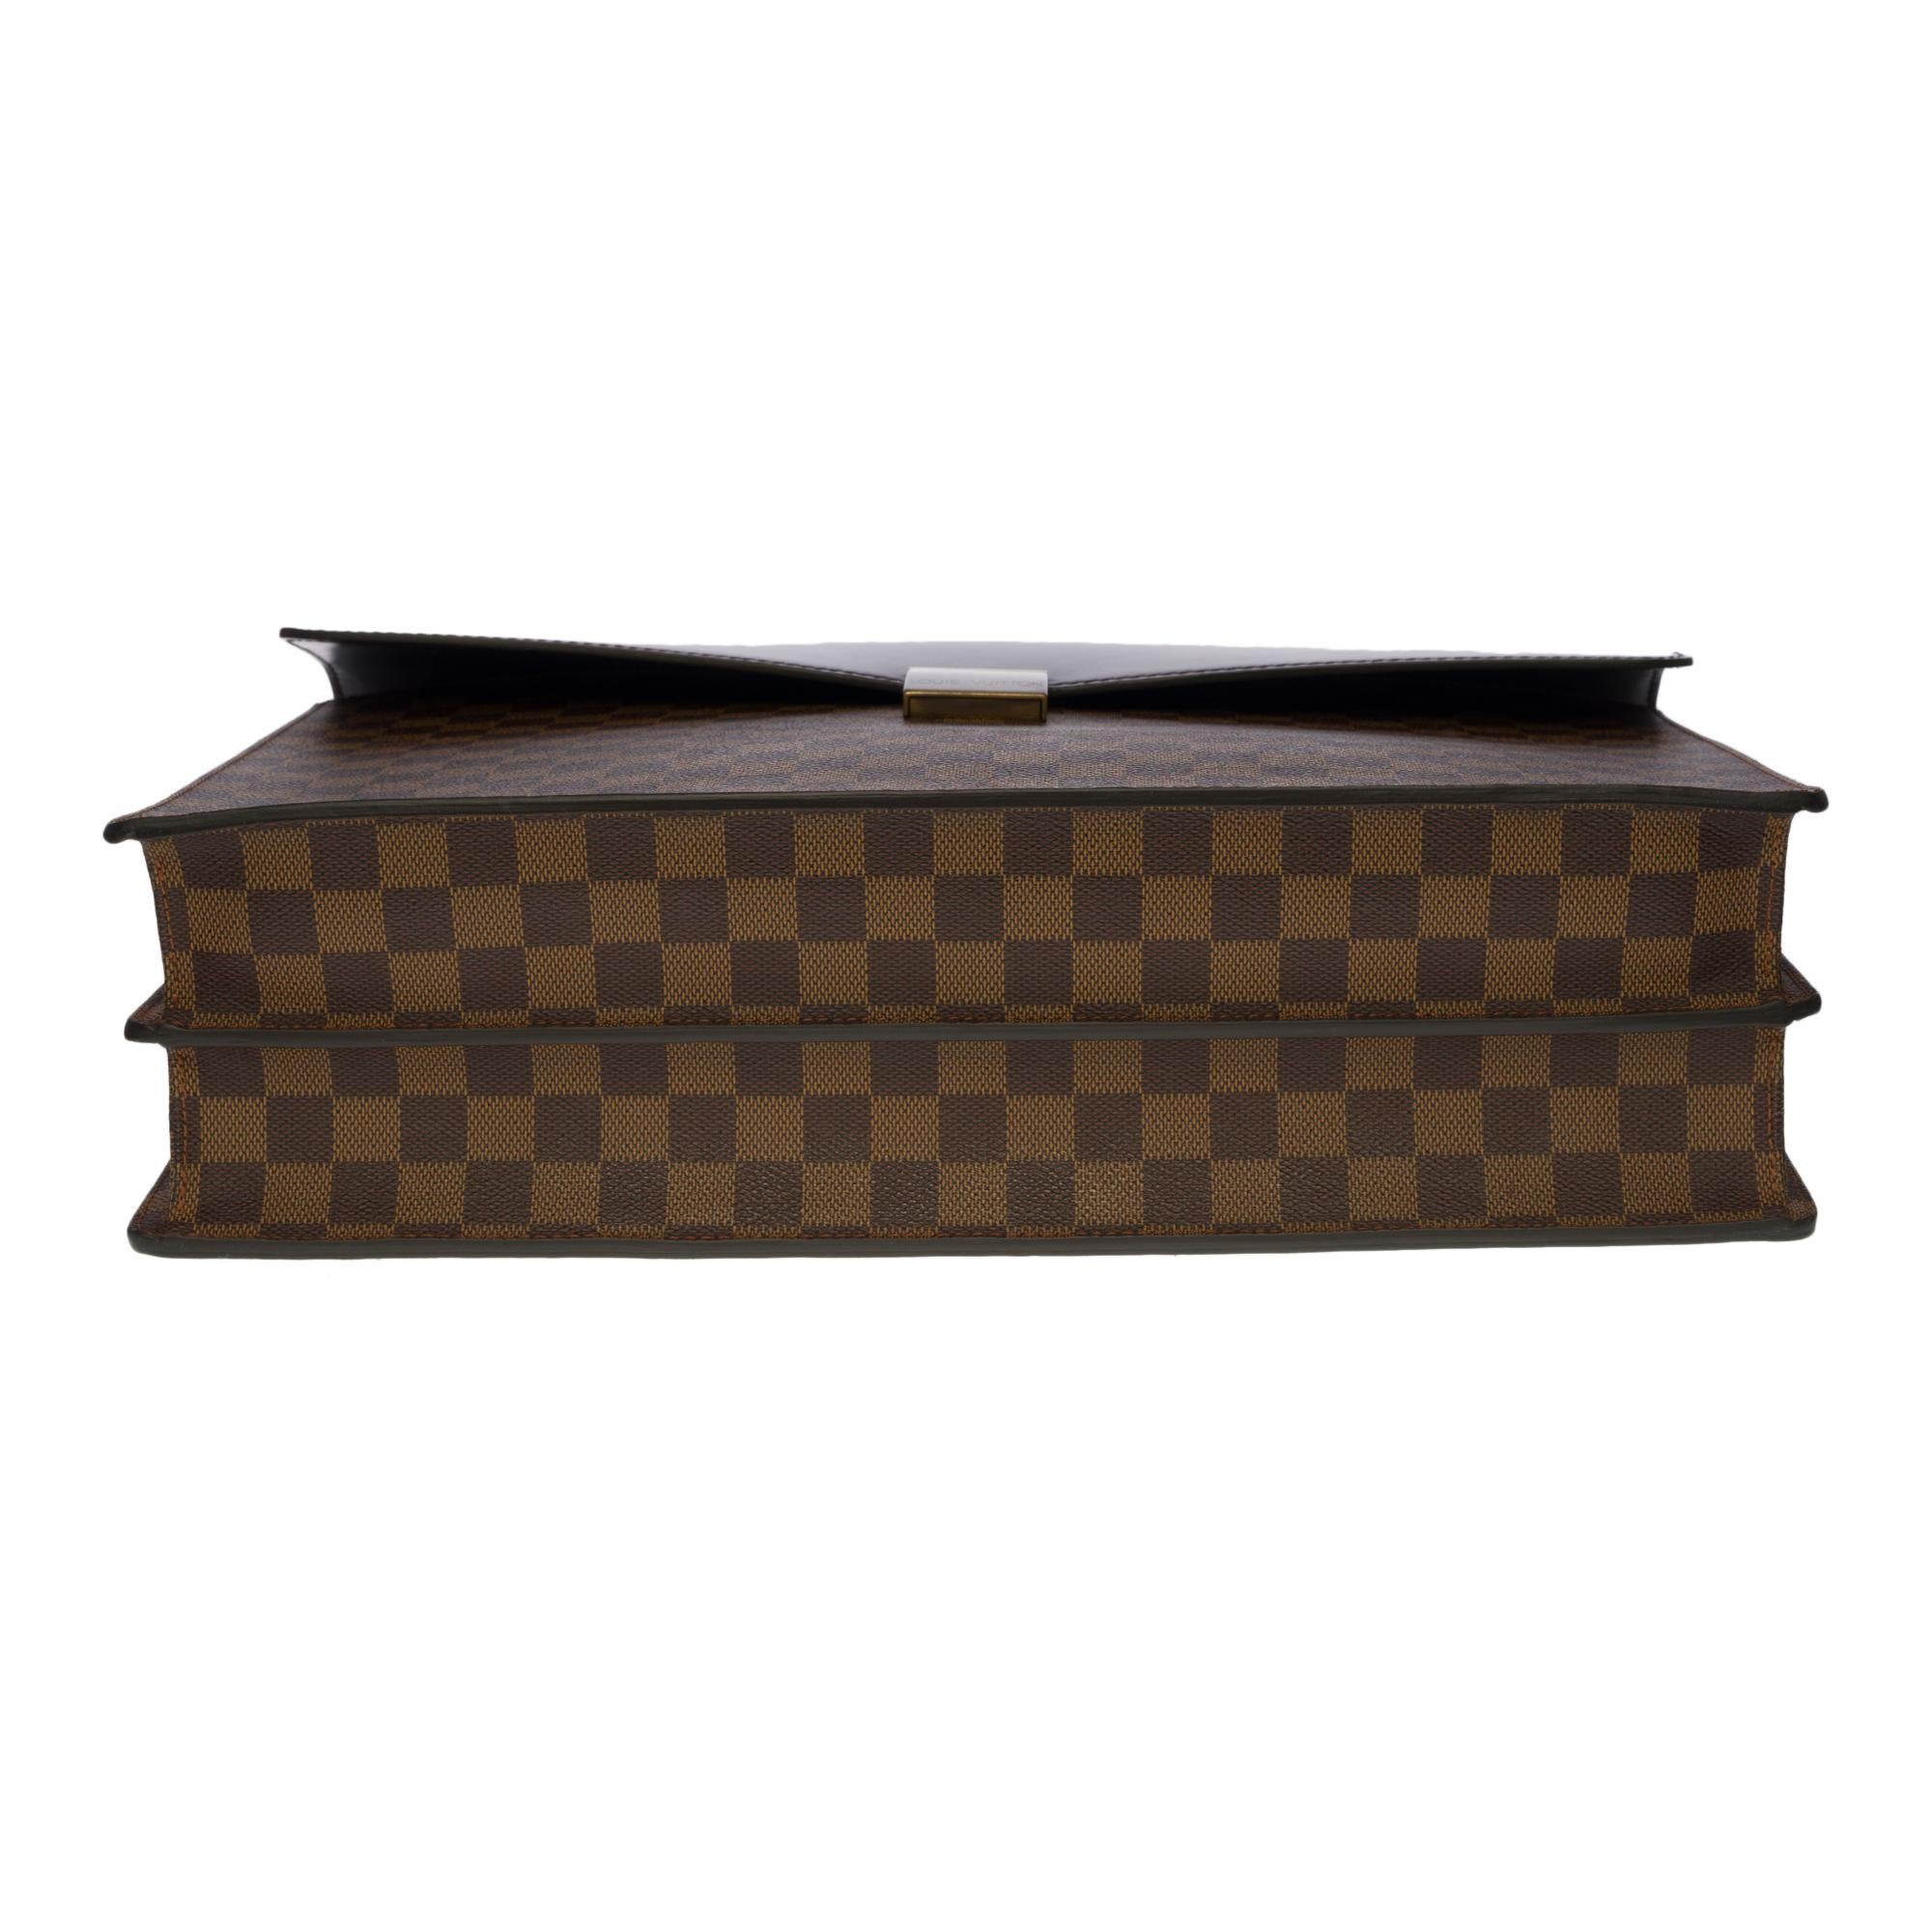 Louis Vuitton Altona Briefcase in brown checkerboard canvas and brown leather 3